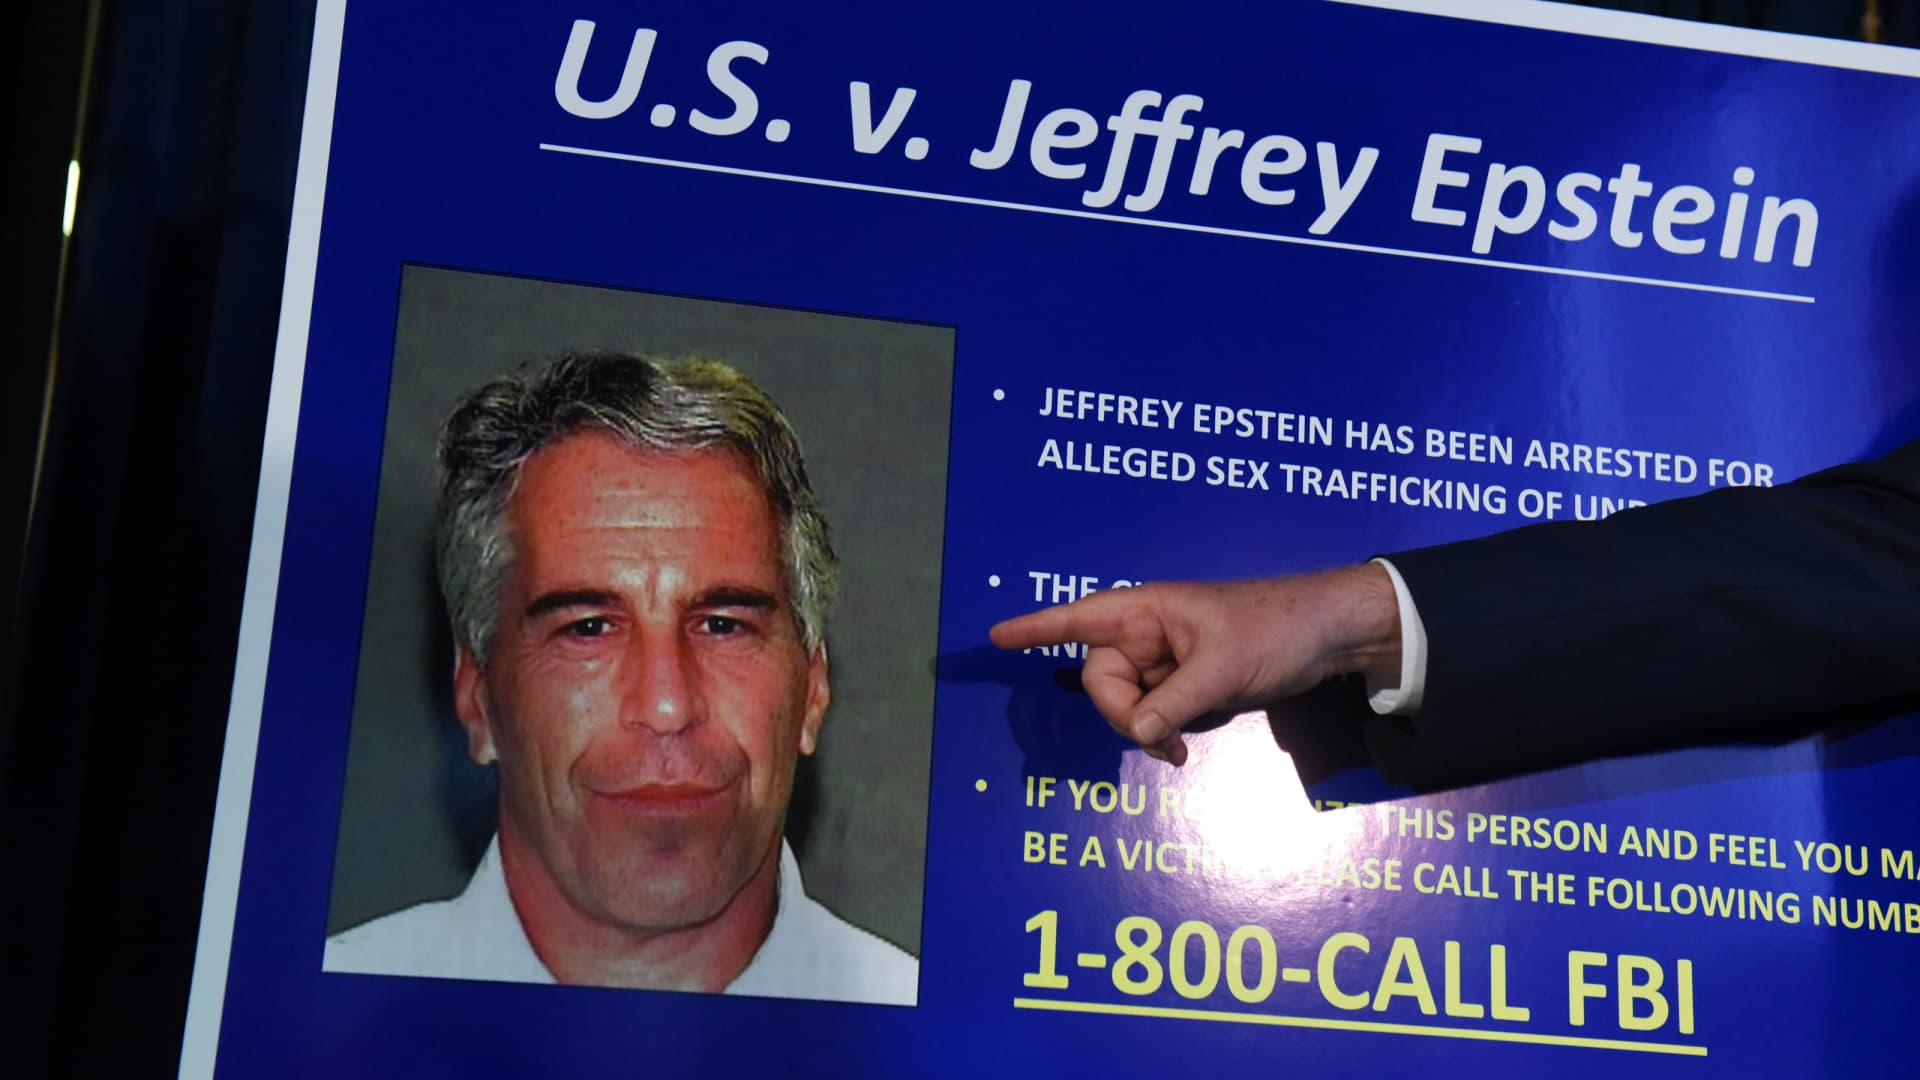 Charges against Jeffrey Epstein were announced on July 8, 2019 in New York City. Epstein will be charged with one count of sex trafficking of minors and one count of conspiracy to engage in sex trafficking of minors.